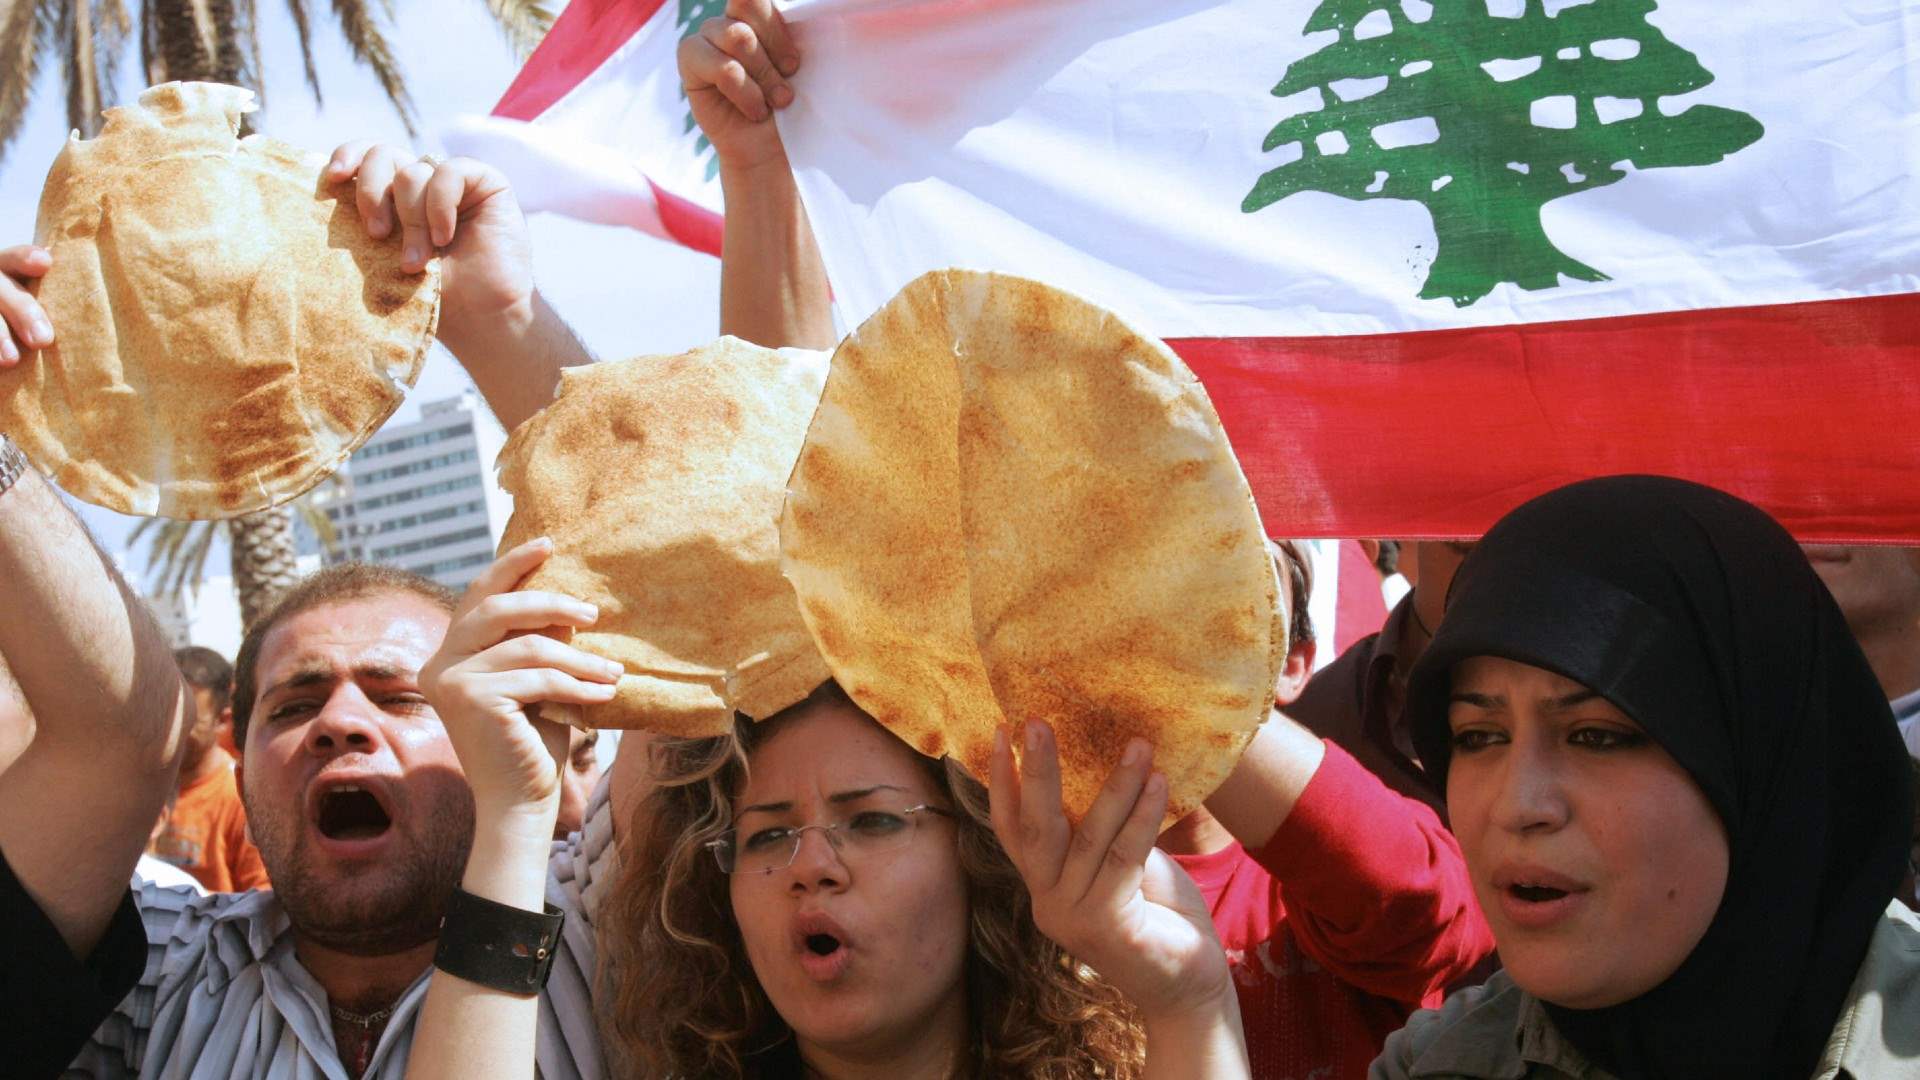 Lebanon ranks 3rd most hit by food inflation: report  